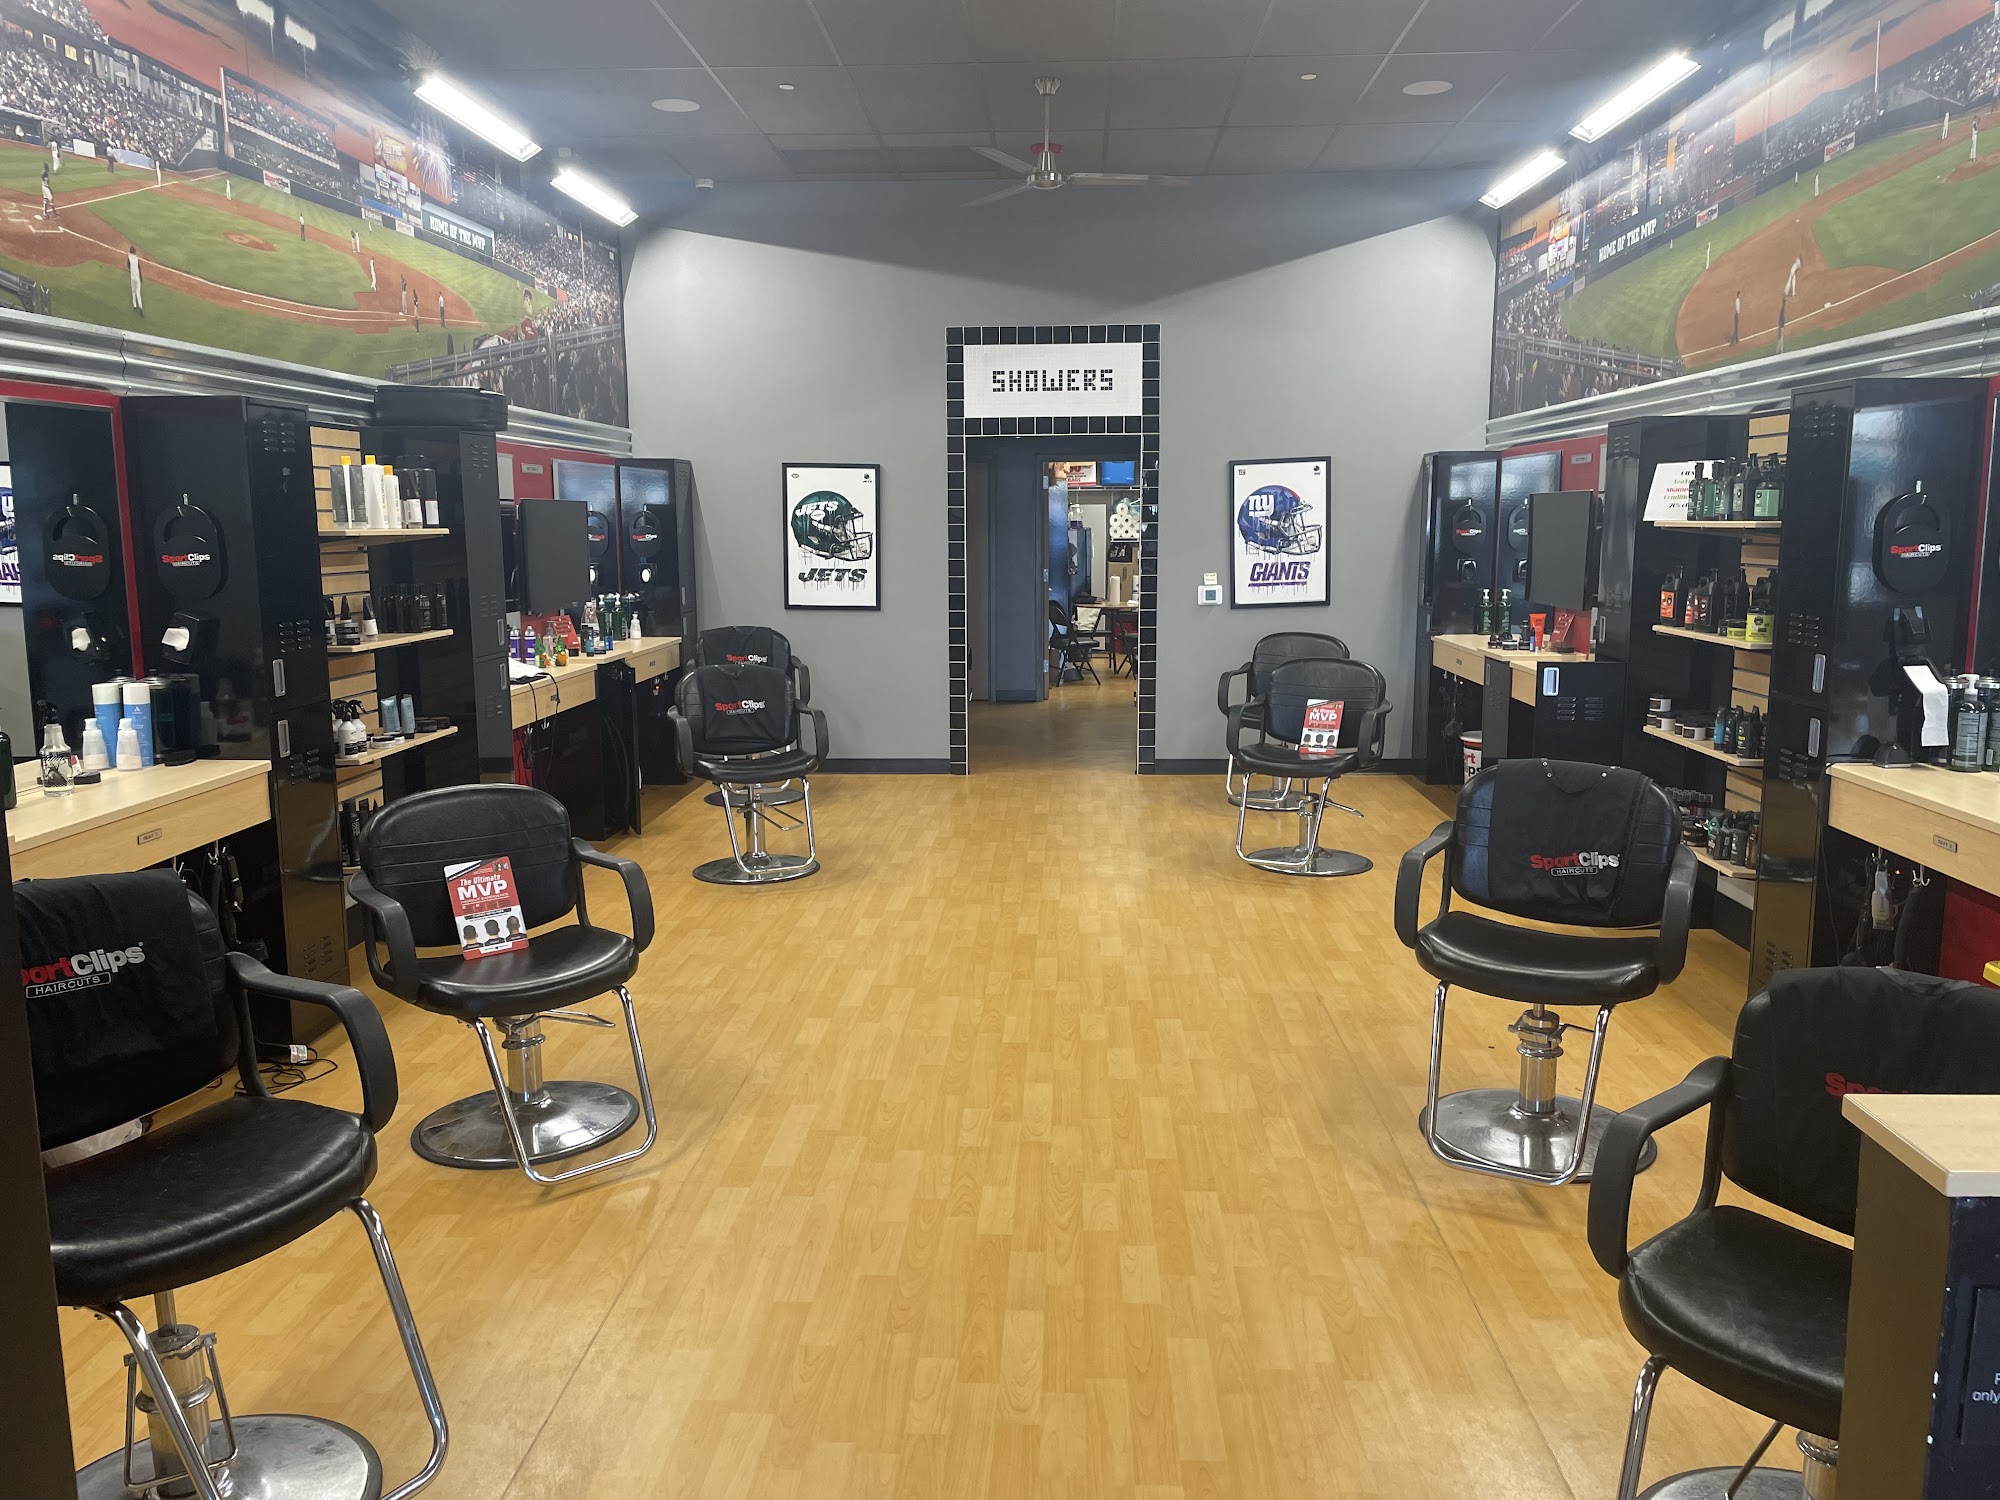 Sport Clips Haircuts of Florham Park 176 Columbia Turnpike, Florham Park New Jersey 07932